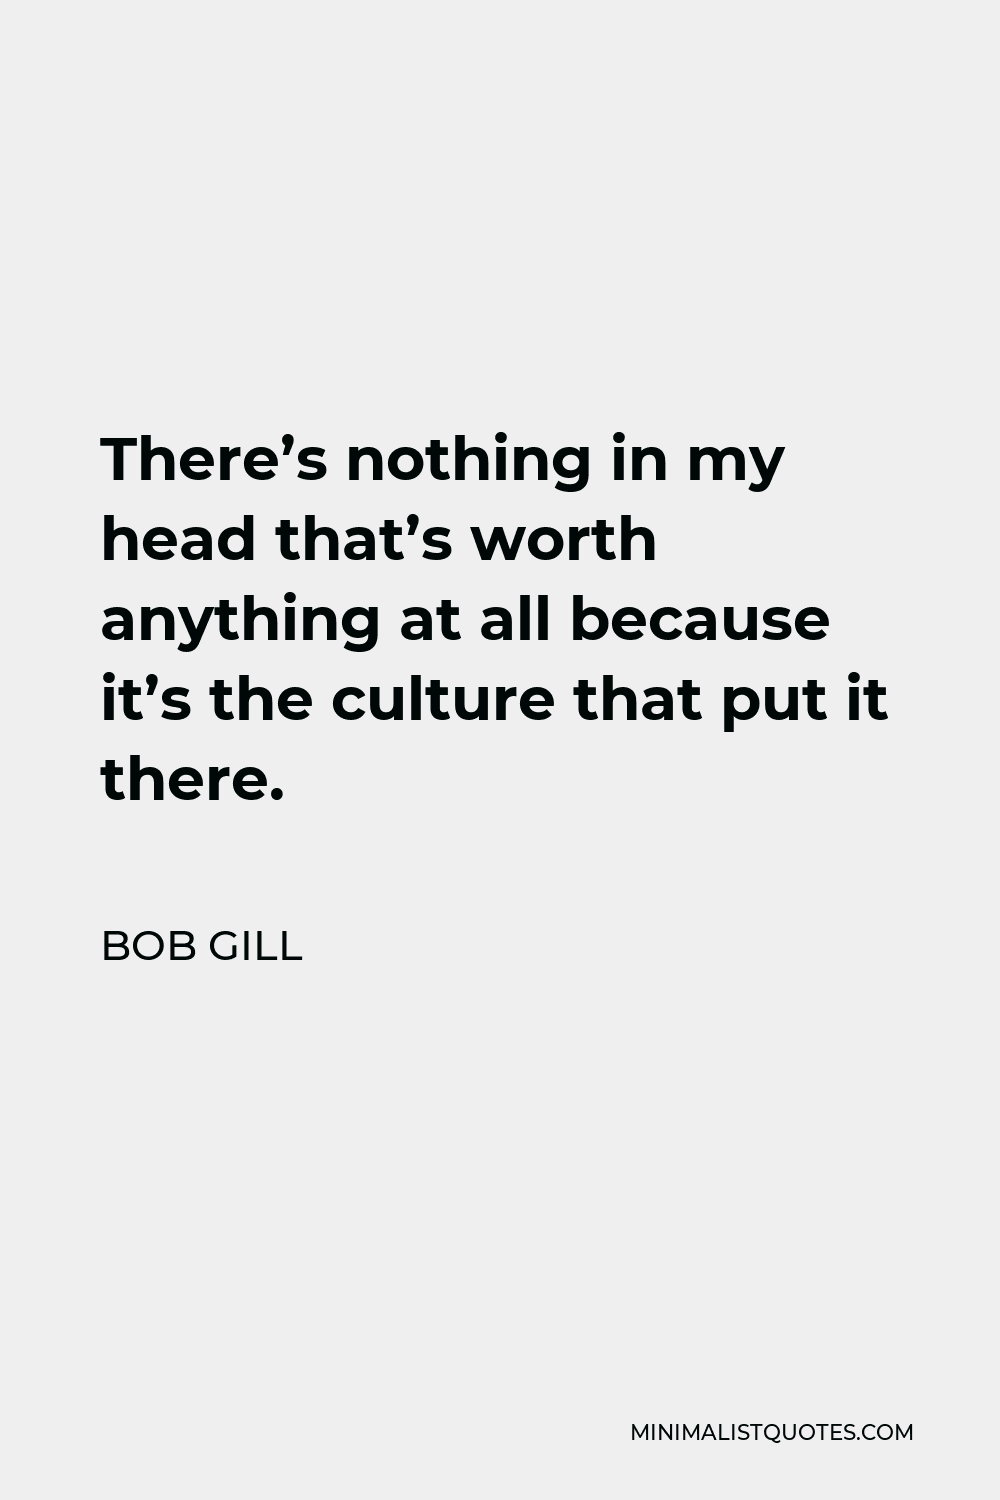 Bob Gill Quote - There’s nothing in my head that’s worth anything at all because it’s the culture that put it there.